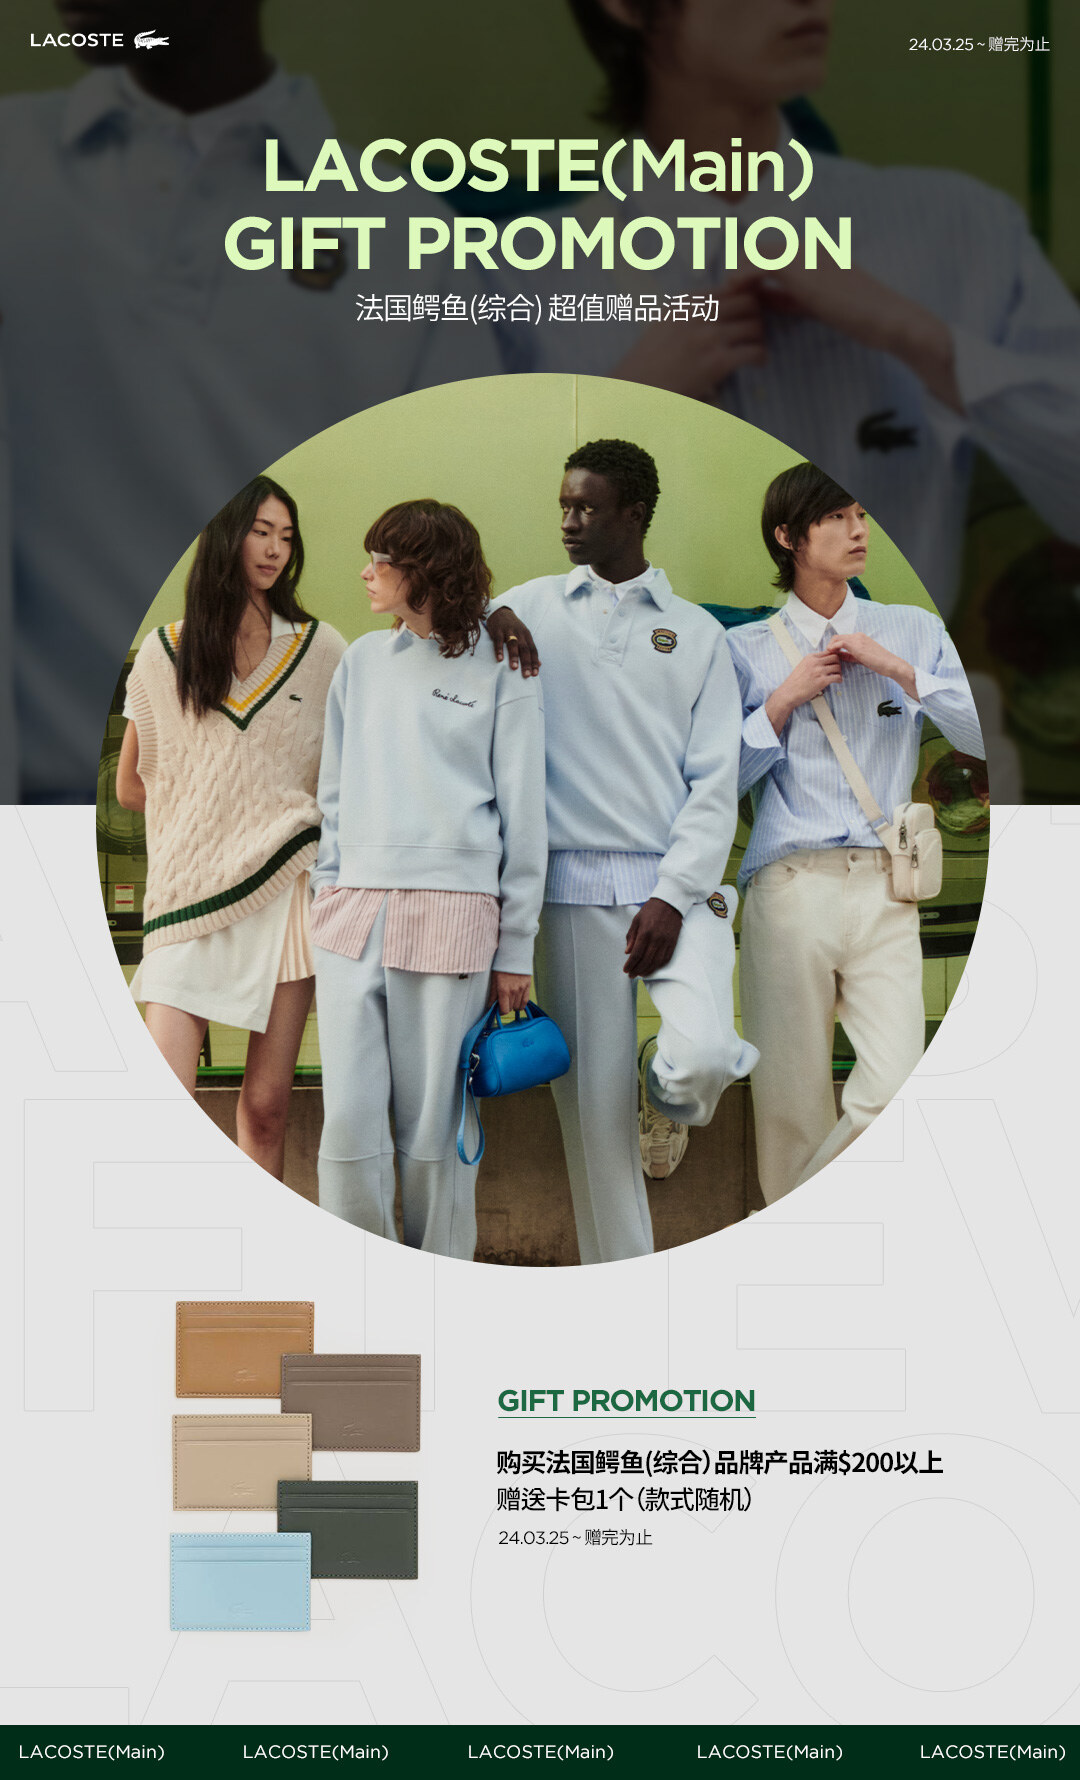 LACOSTE(Main) GIFT PROMOTION